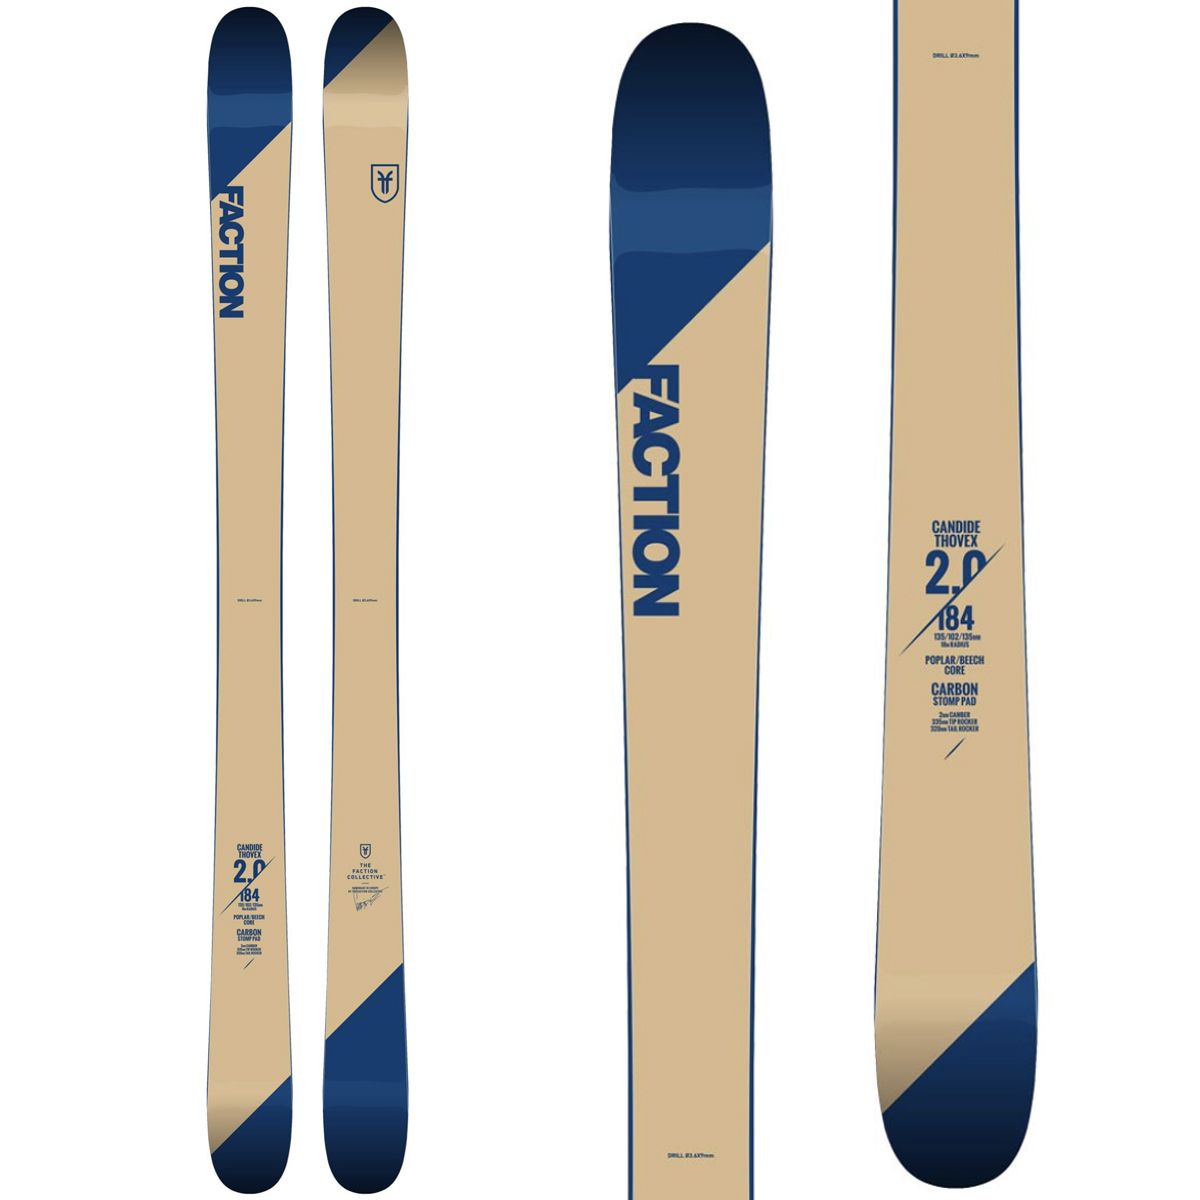 Pack Skis Candide 2.0 2019 + Fixations